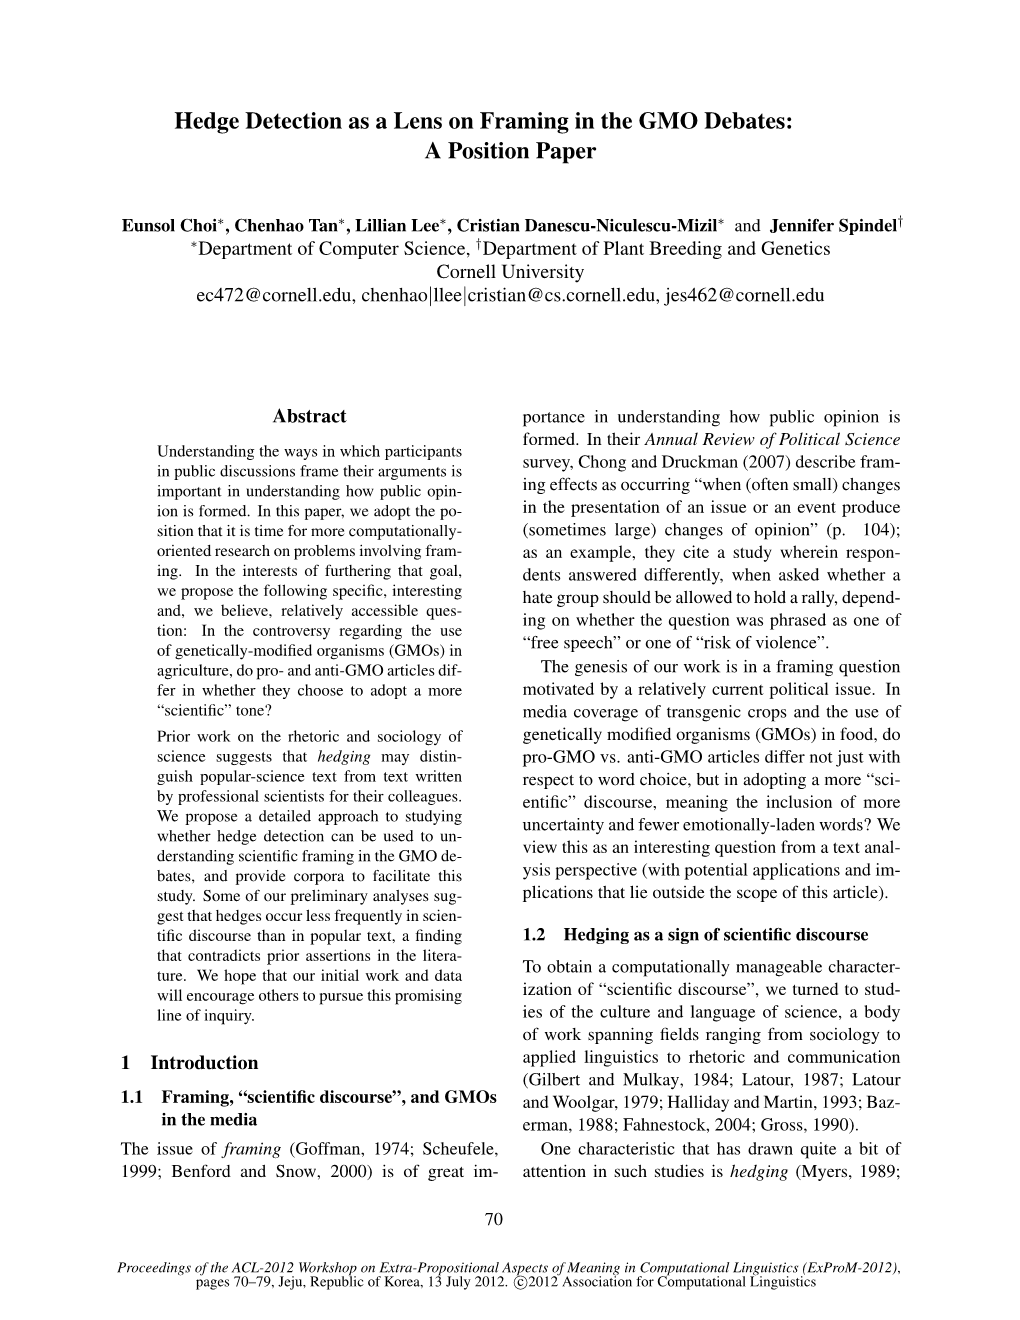 Hedge Detection As a Lens on Framing in the GMO Debates: a Position Paper